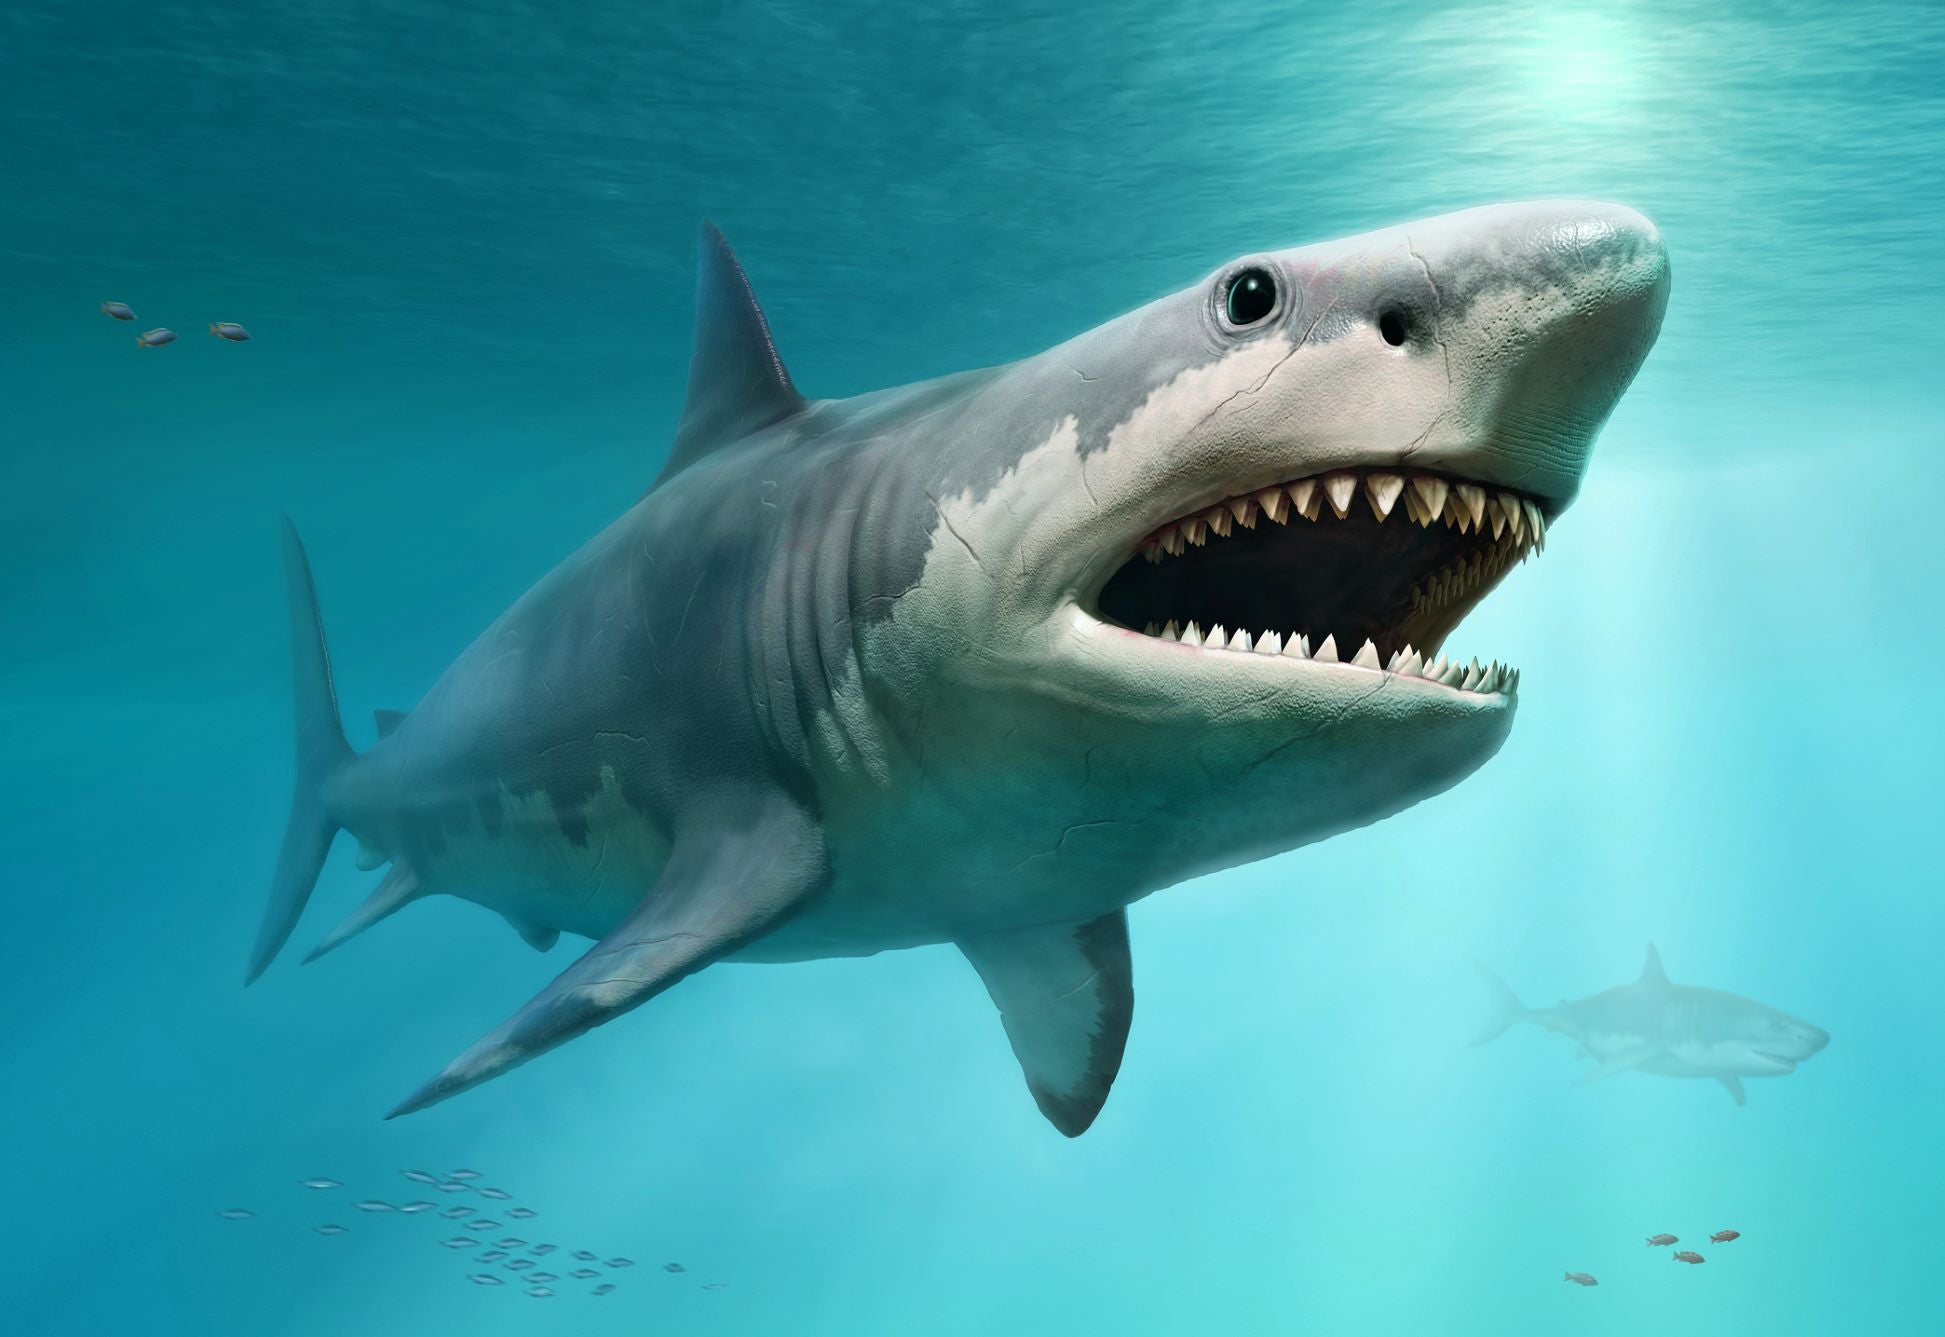 The Megalodon was less mega than previously believed